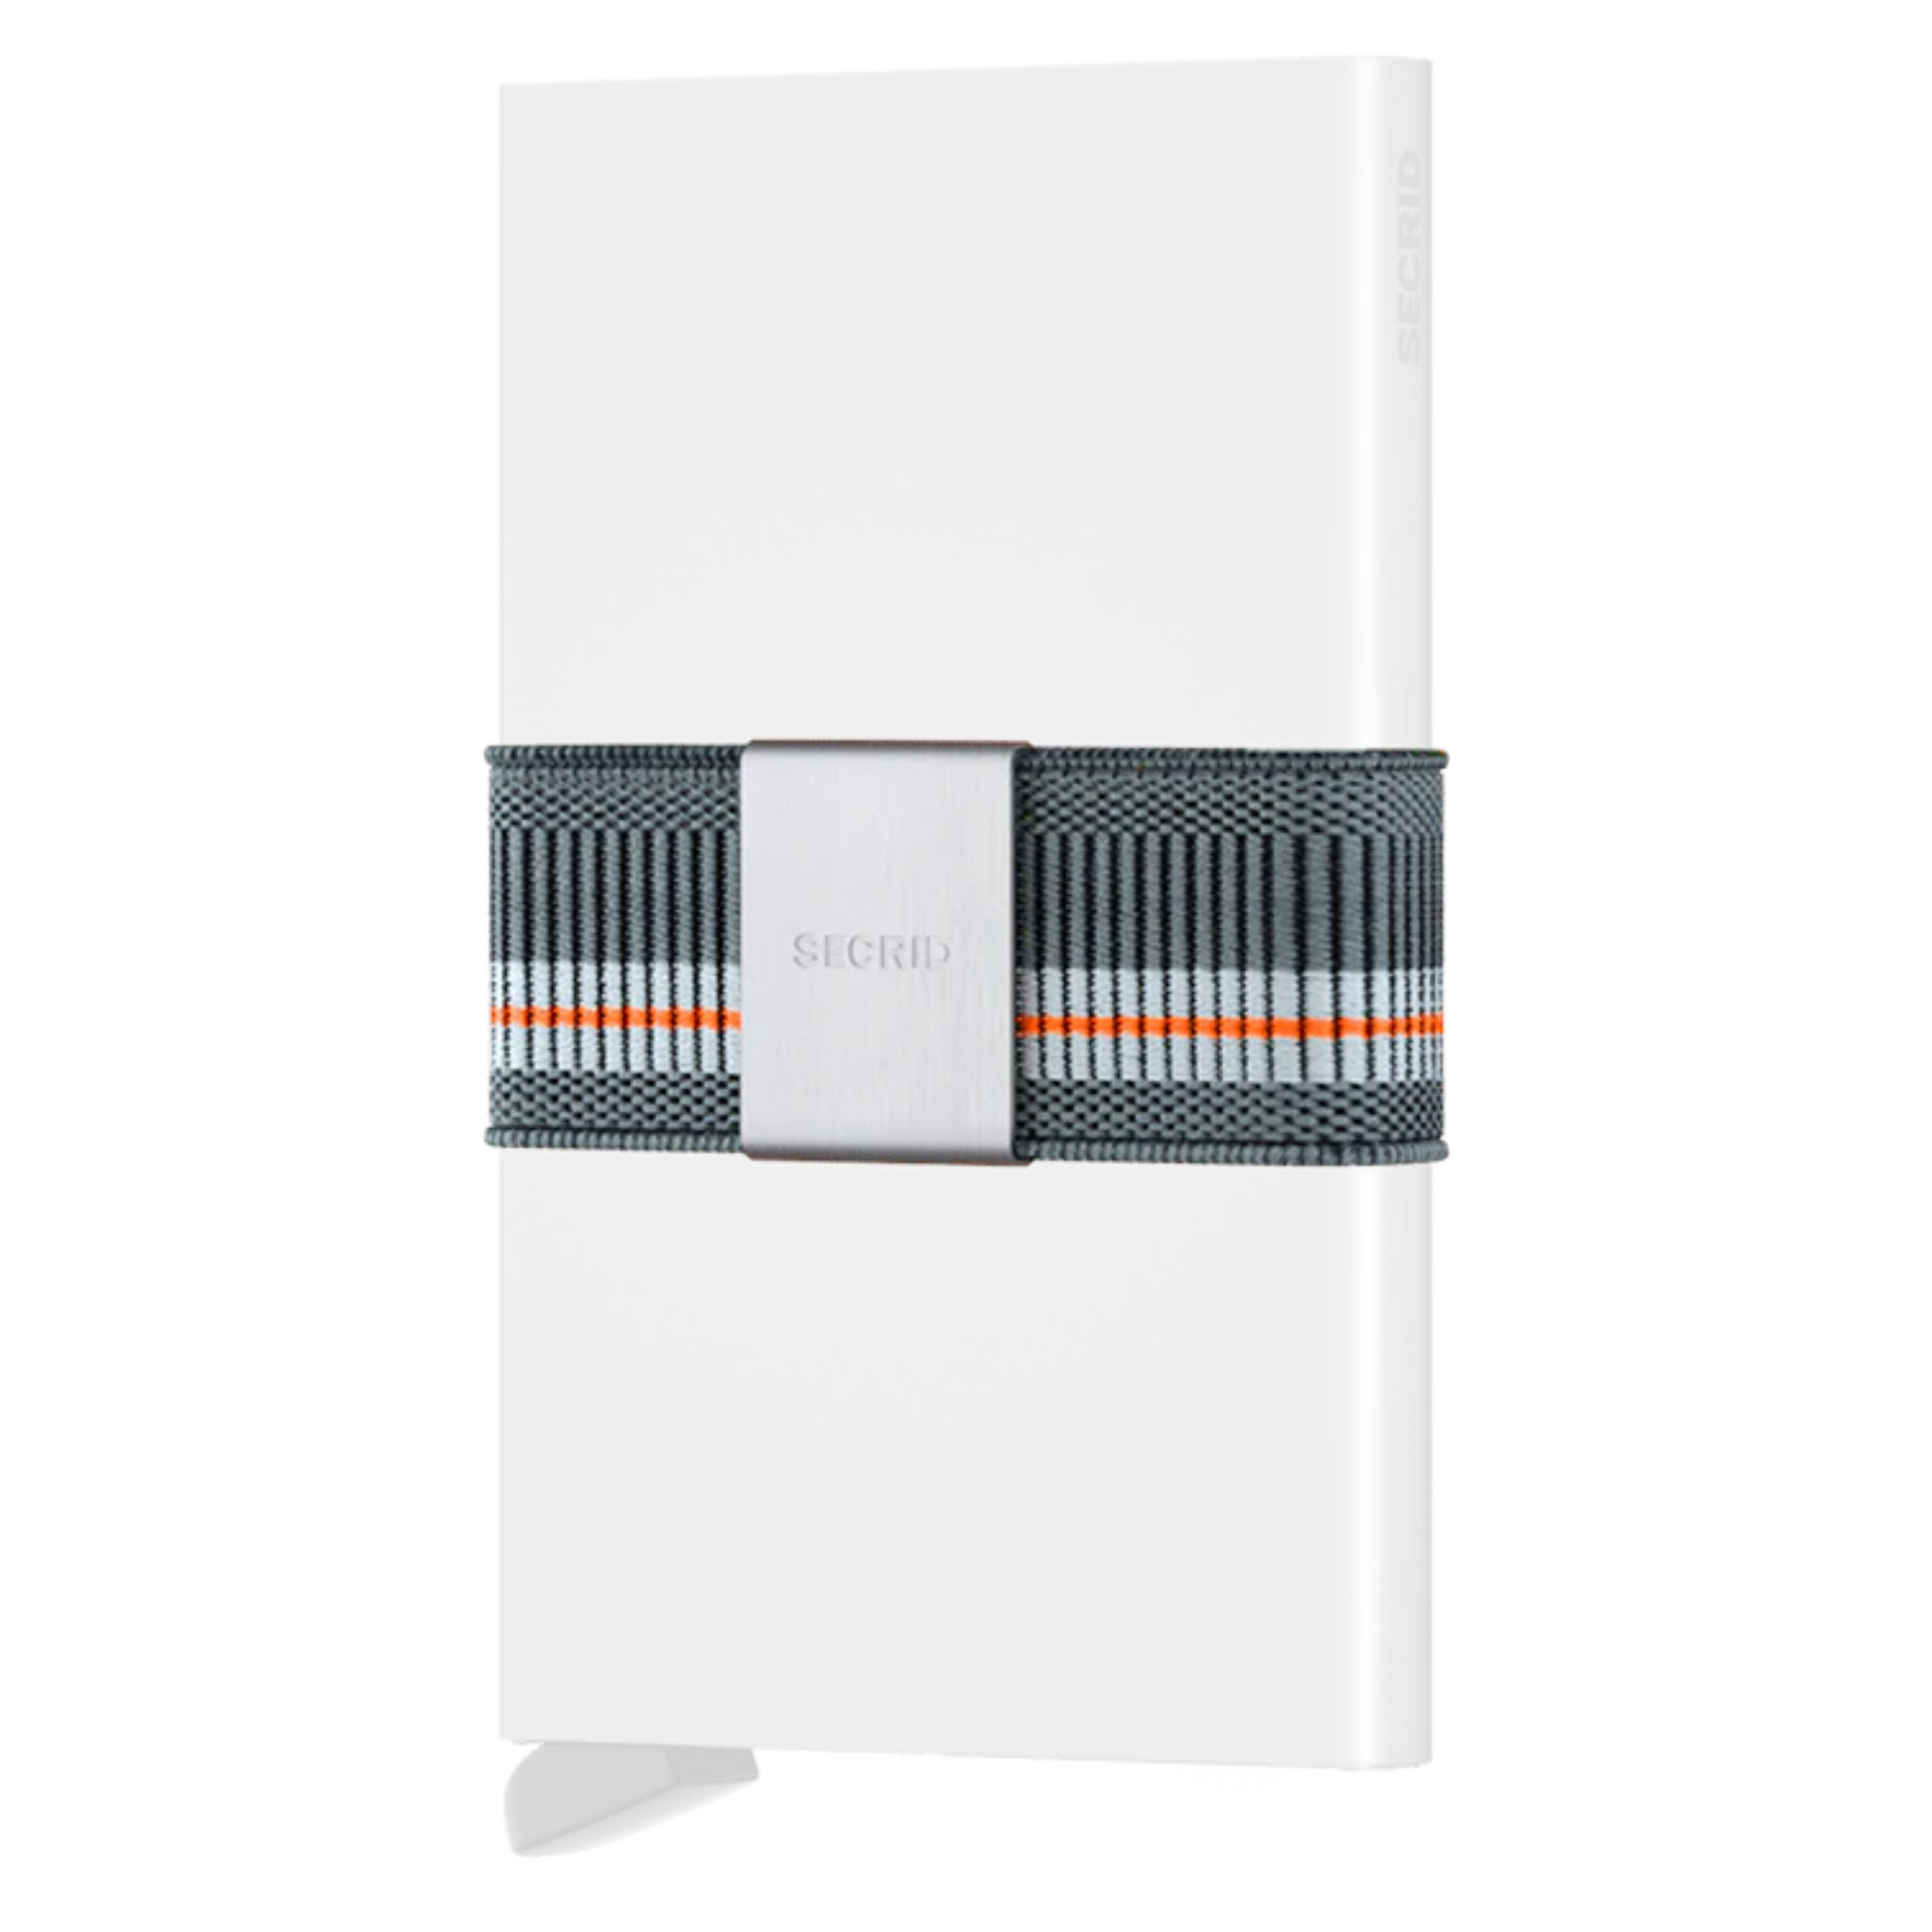 A three tone blue-grey, light blue, and orange elastic has a silver metal square attached.